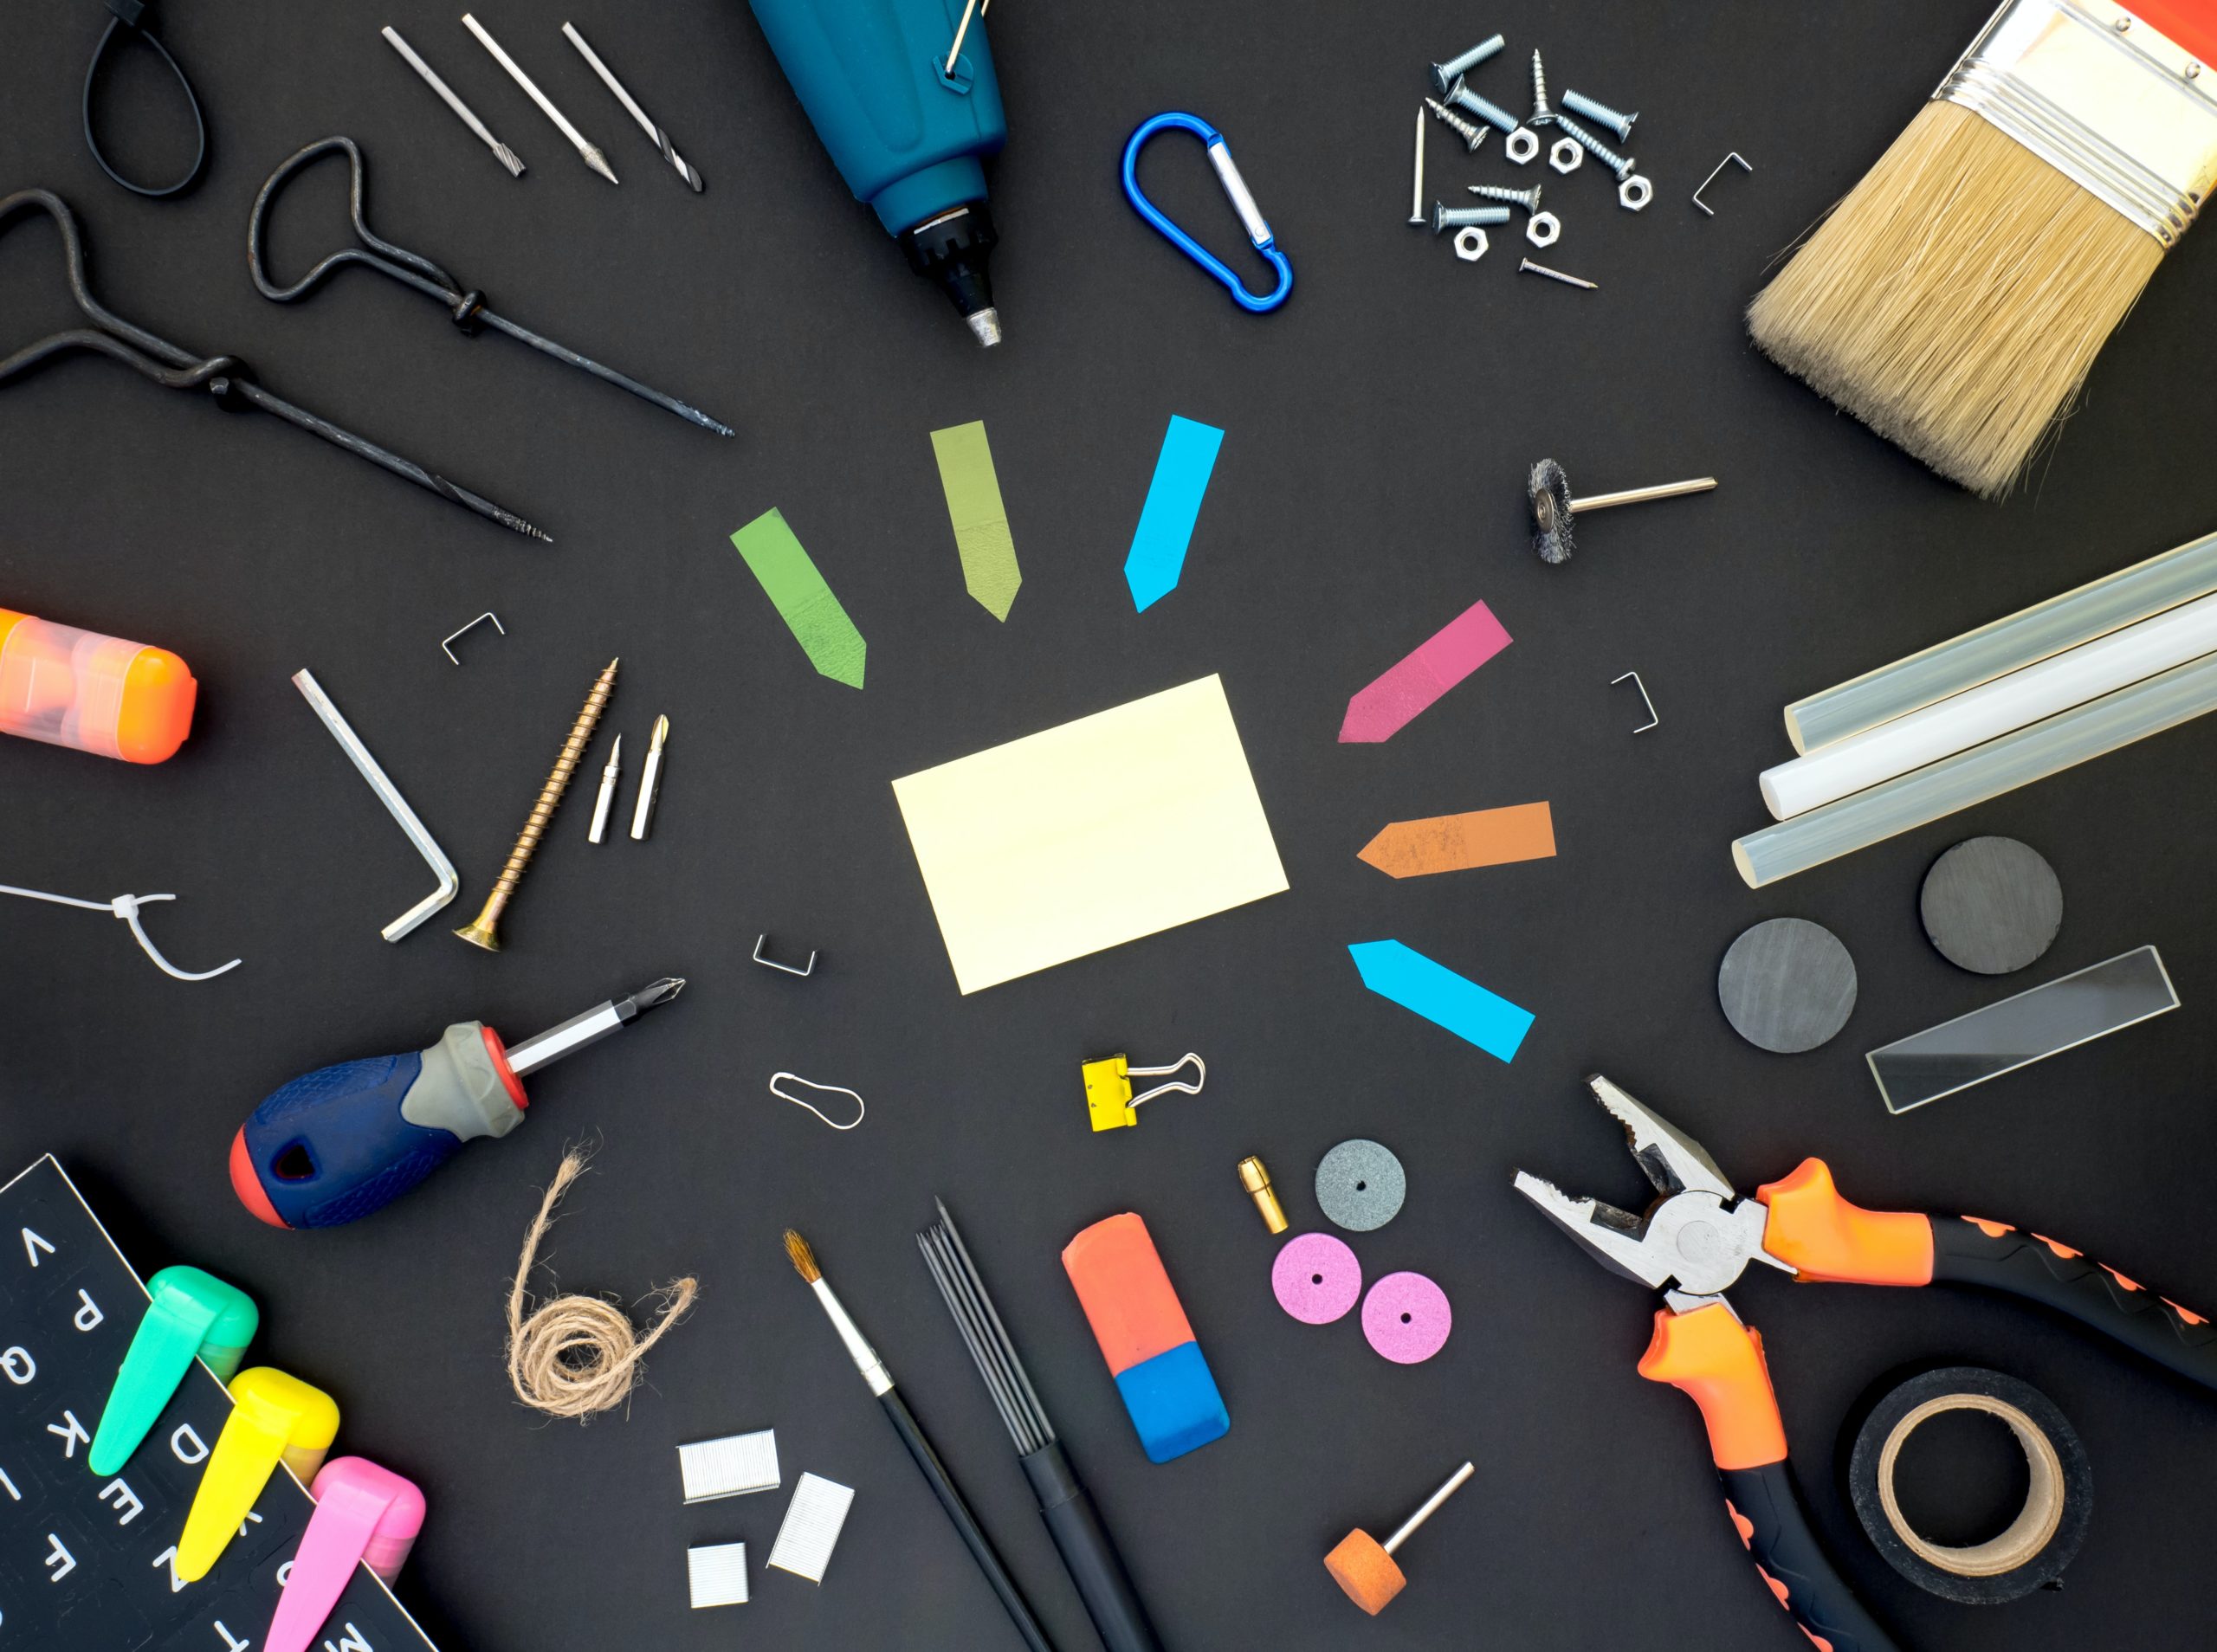 An assortment of tools laying on a black surface including post-its, screwdrivers, wrenches, tape, paintbrushes, highlighters, glue sticks, staples, magnets, and paperclips.